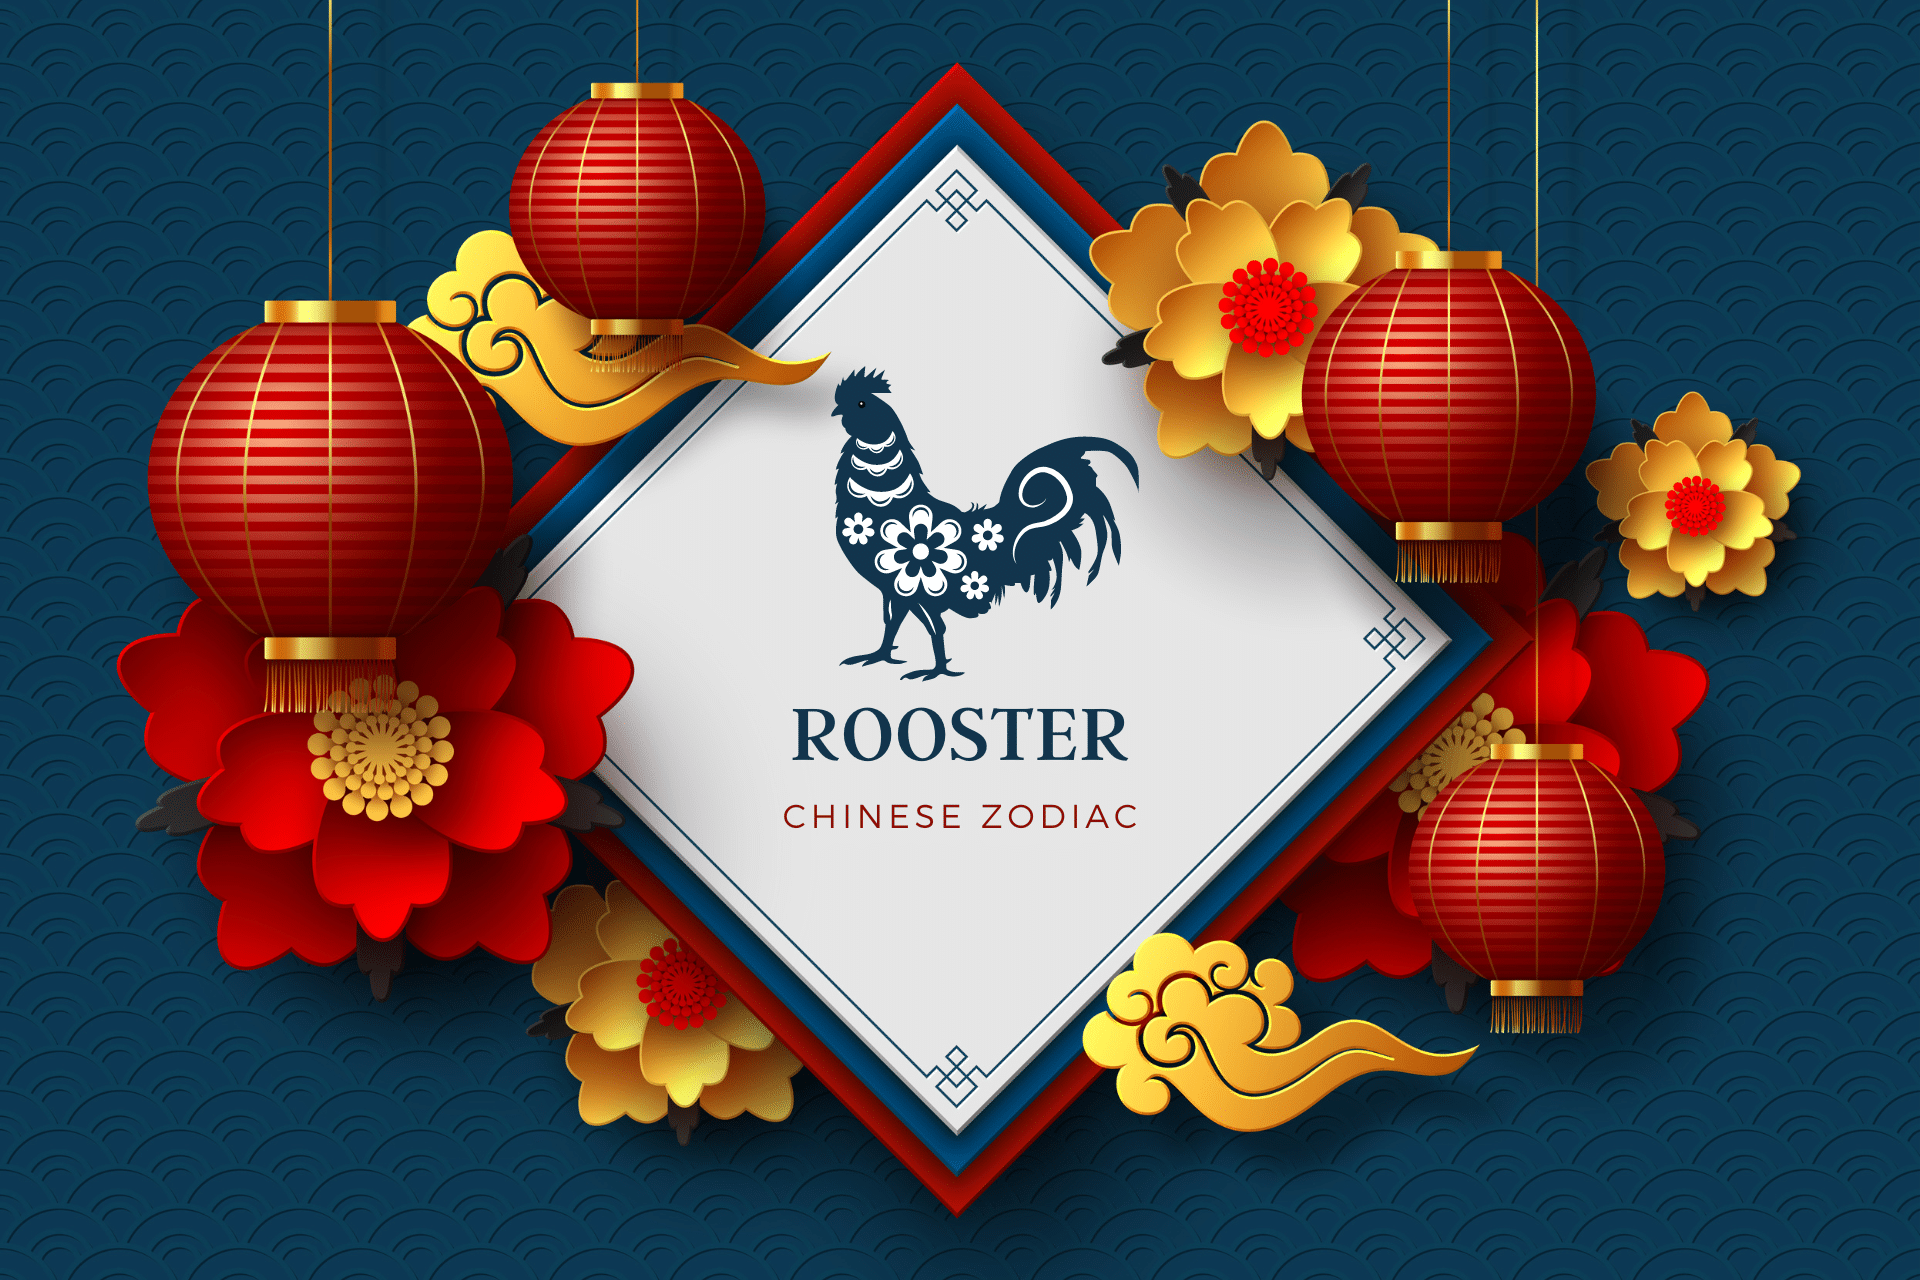 Rooster Chinese Zodiac sign